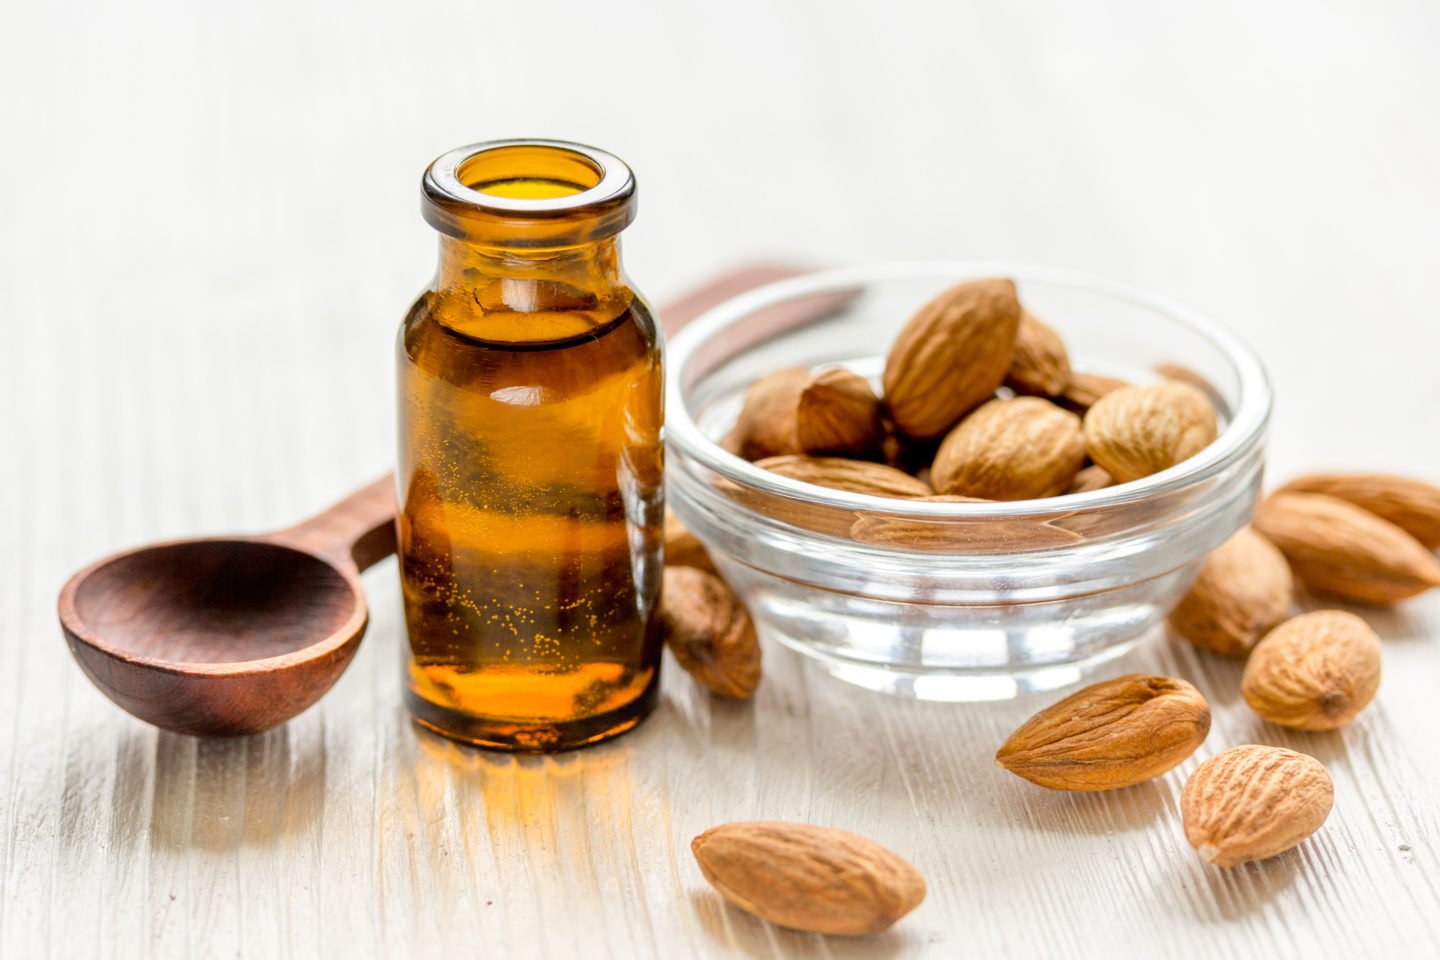 Almond Extract In Glass Bottle Beside Almonds